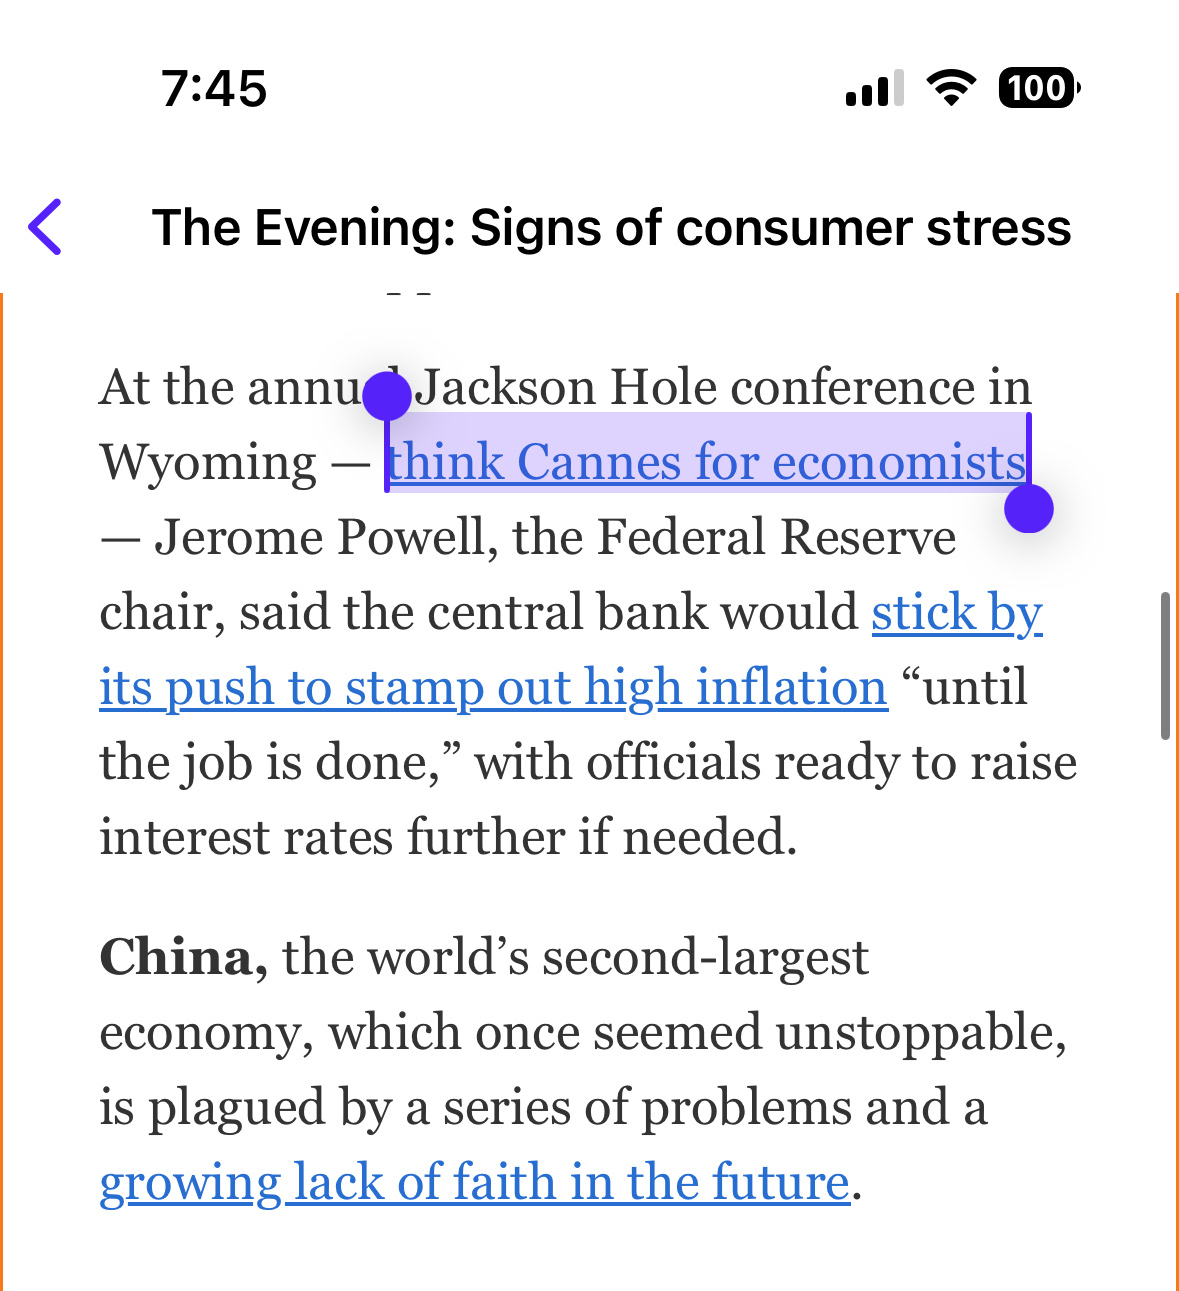 Screenshot from the New York Times evening newsletter with “think Cannes for economist” highlighted